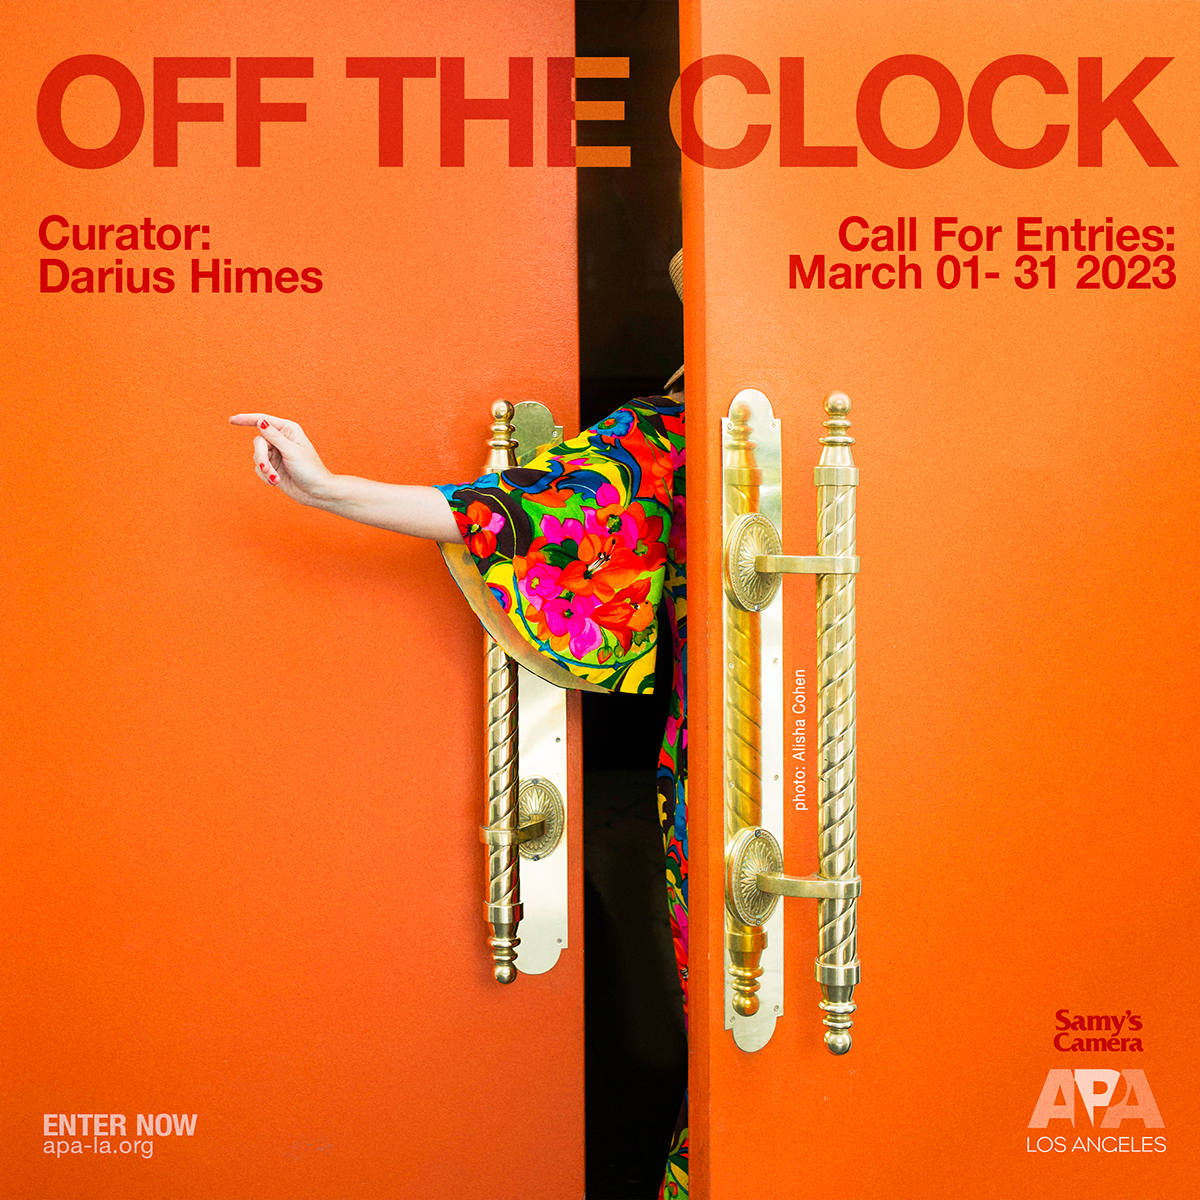 Off the Clock 2023 Call for Entries